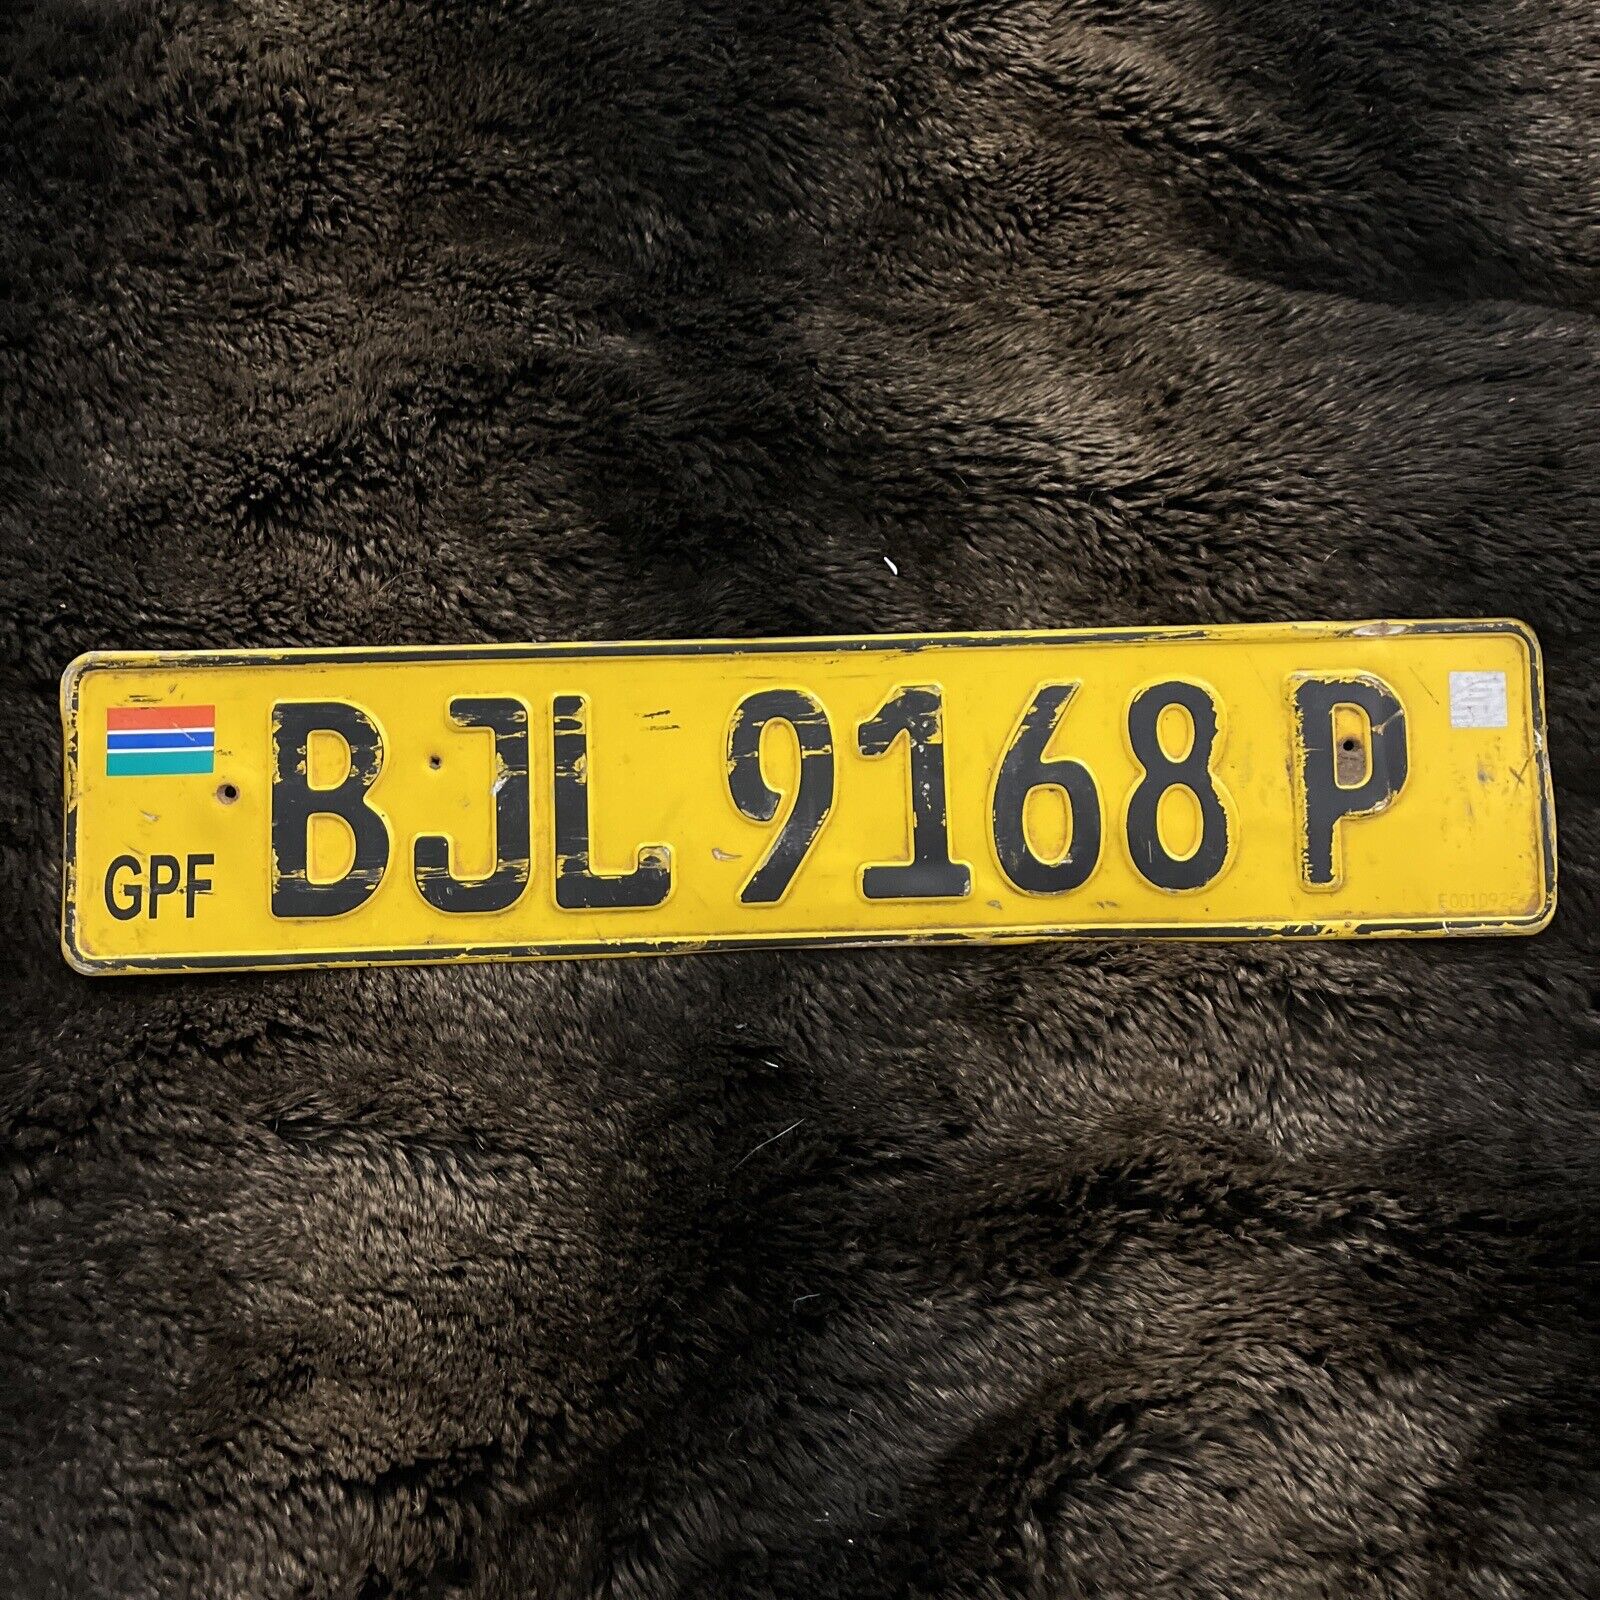 Gambia 🇬🇲 License Plate African Tag Gambian Africa BJL 9168 P GPF The Gambia